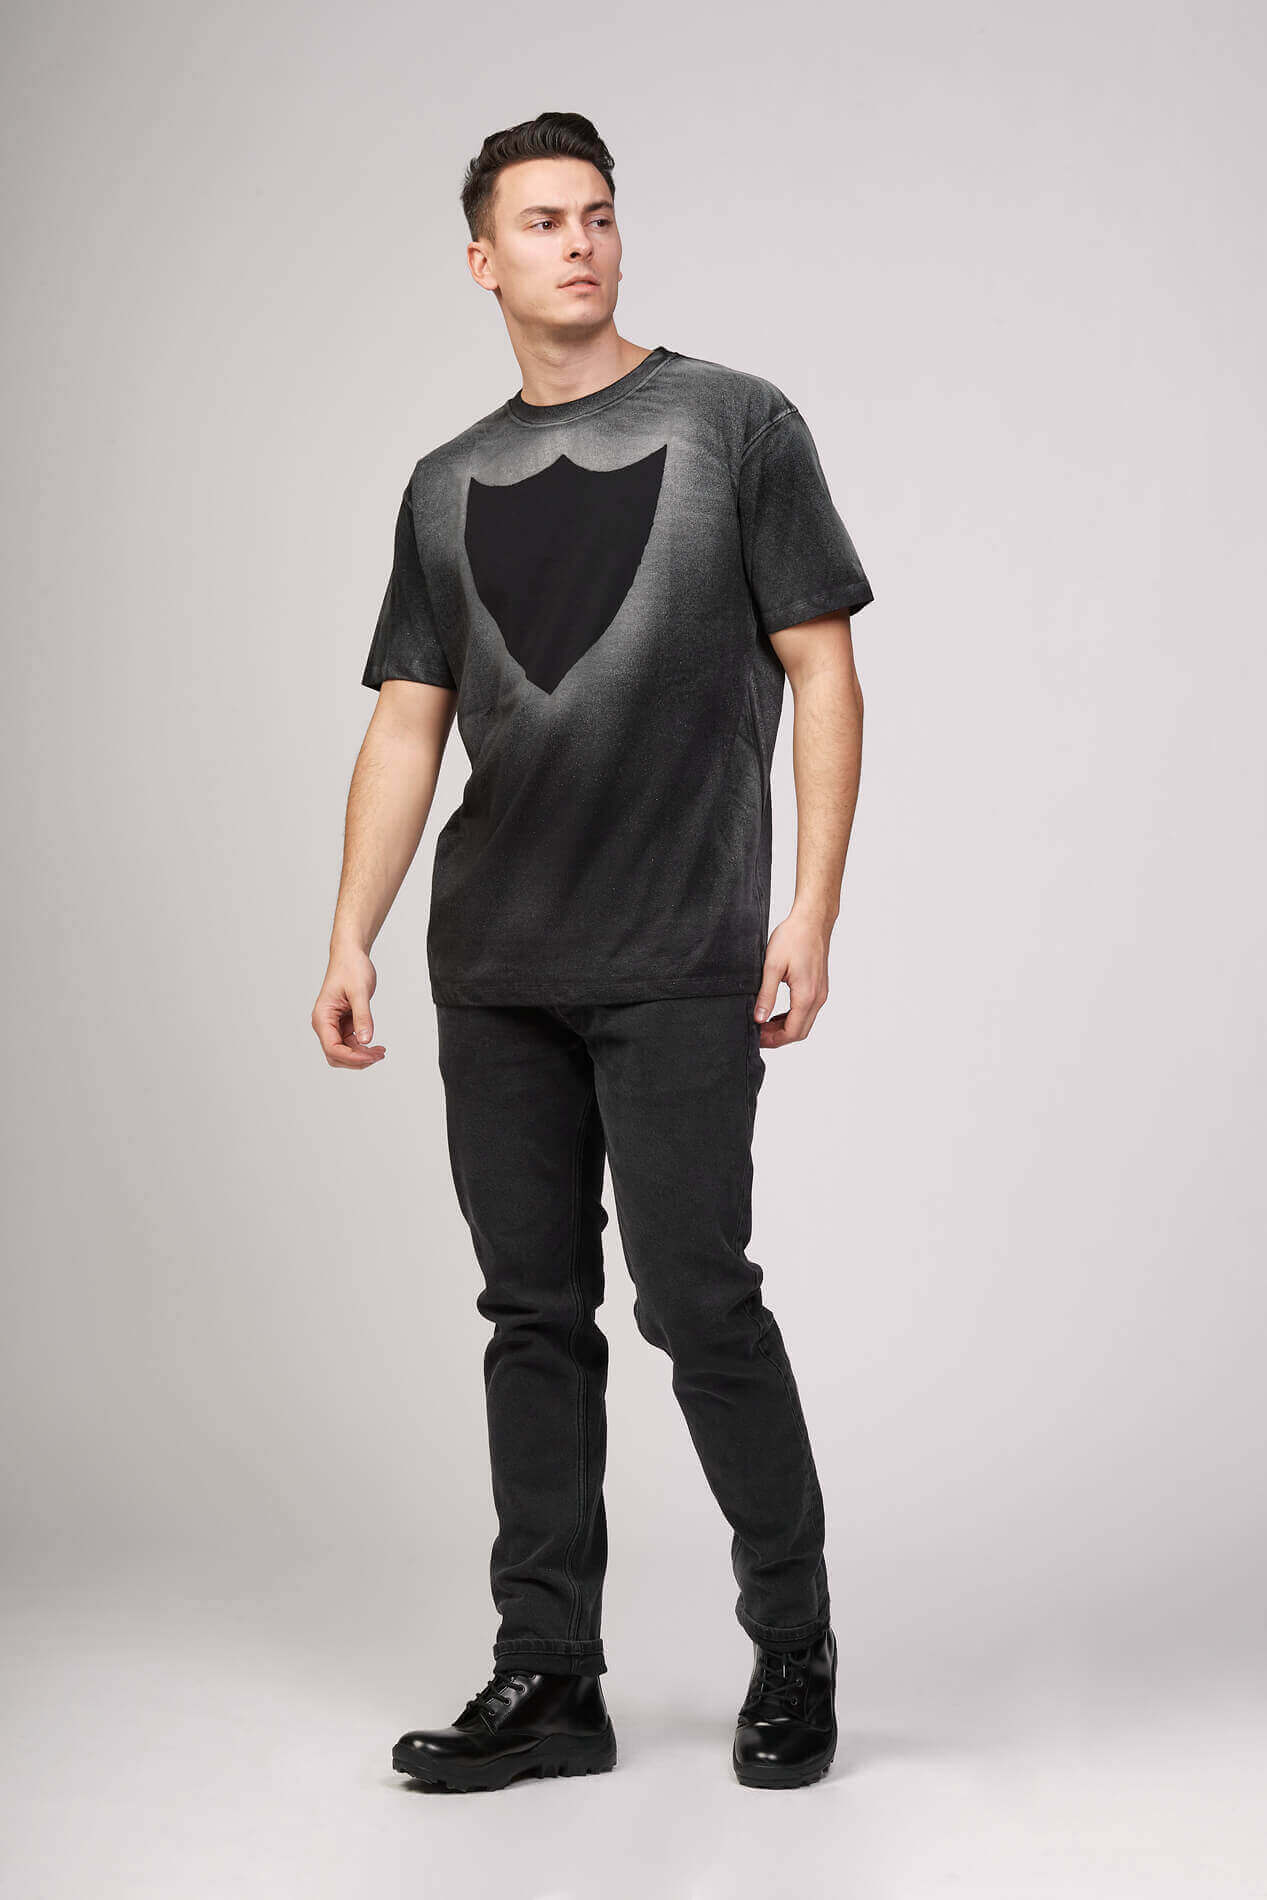 DARK SHIELD T-SHIRT Regular fit t-shirt with 'Cosmo' print and central logo. 100% cotton. Made in Italy. HTC LOS ANGELES